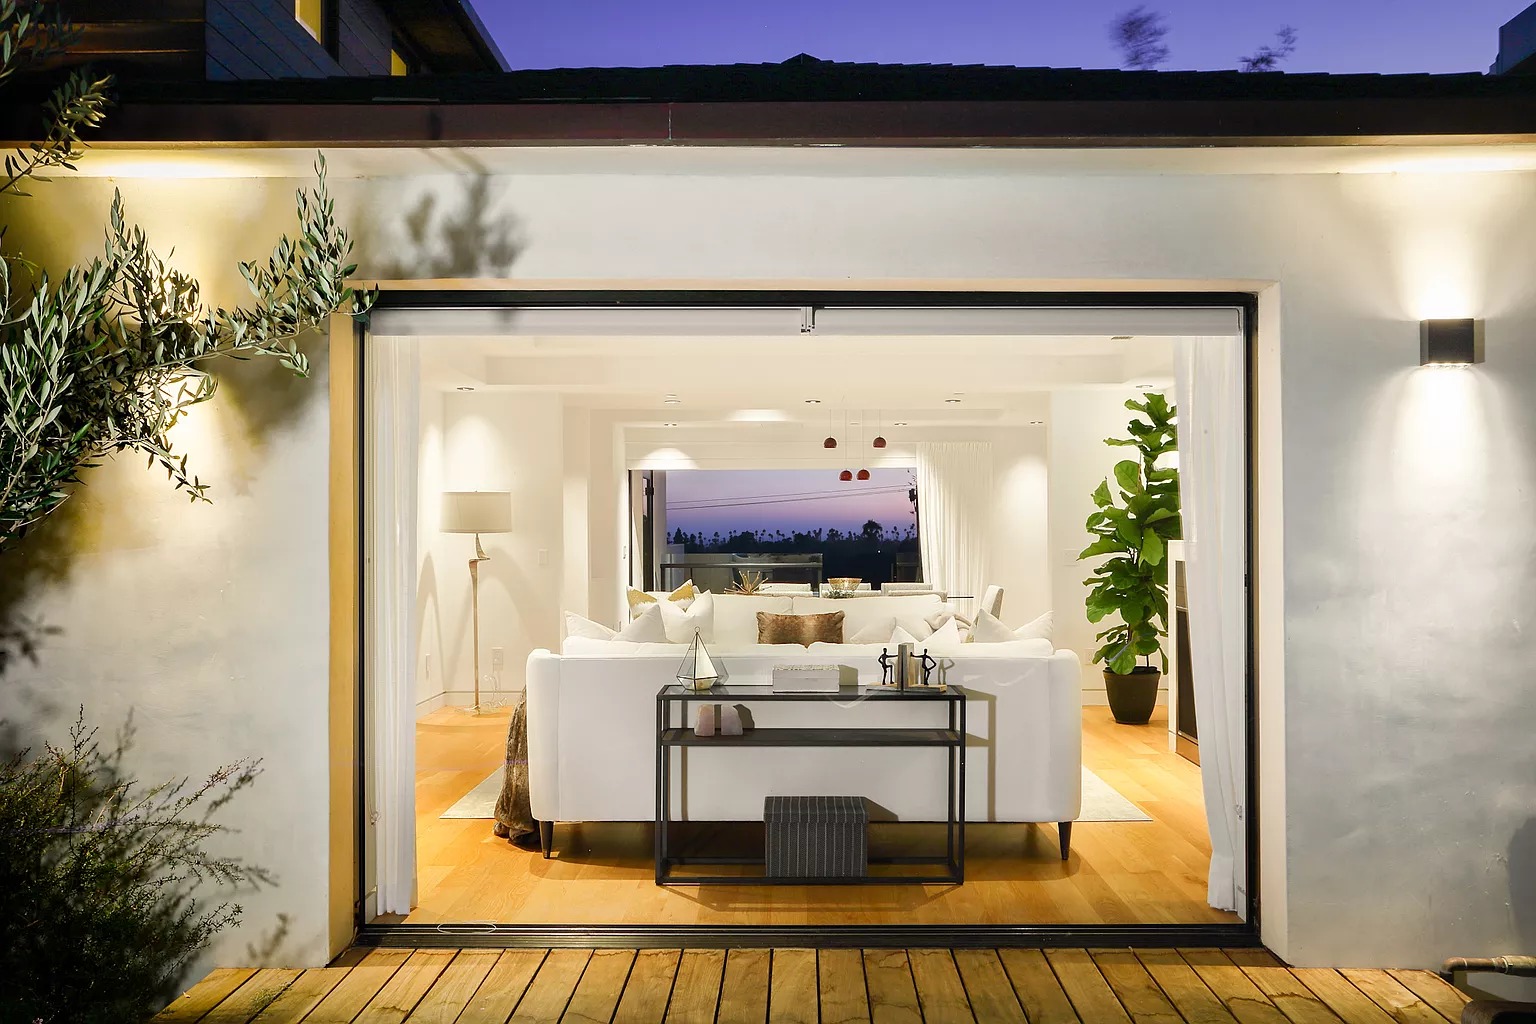 902 Berkeley St, Santa Monica, CA 90403 - $5,995,000 home for sale, house images, photos and pics gallery